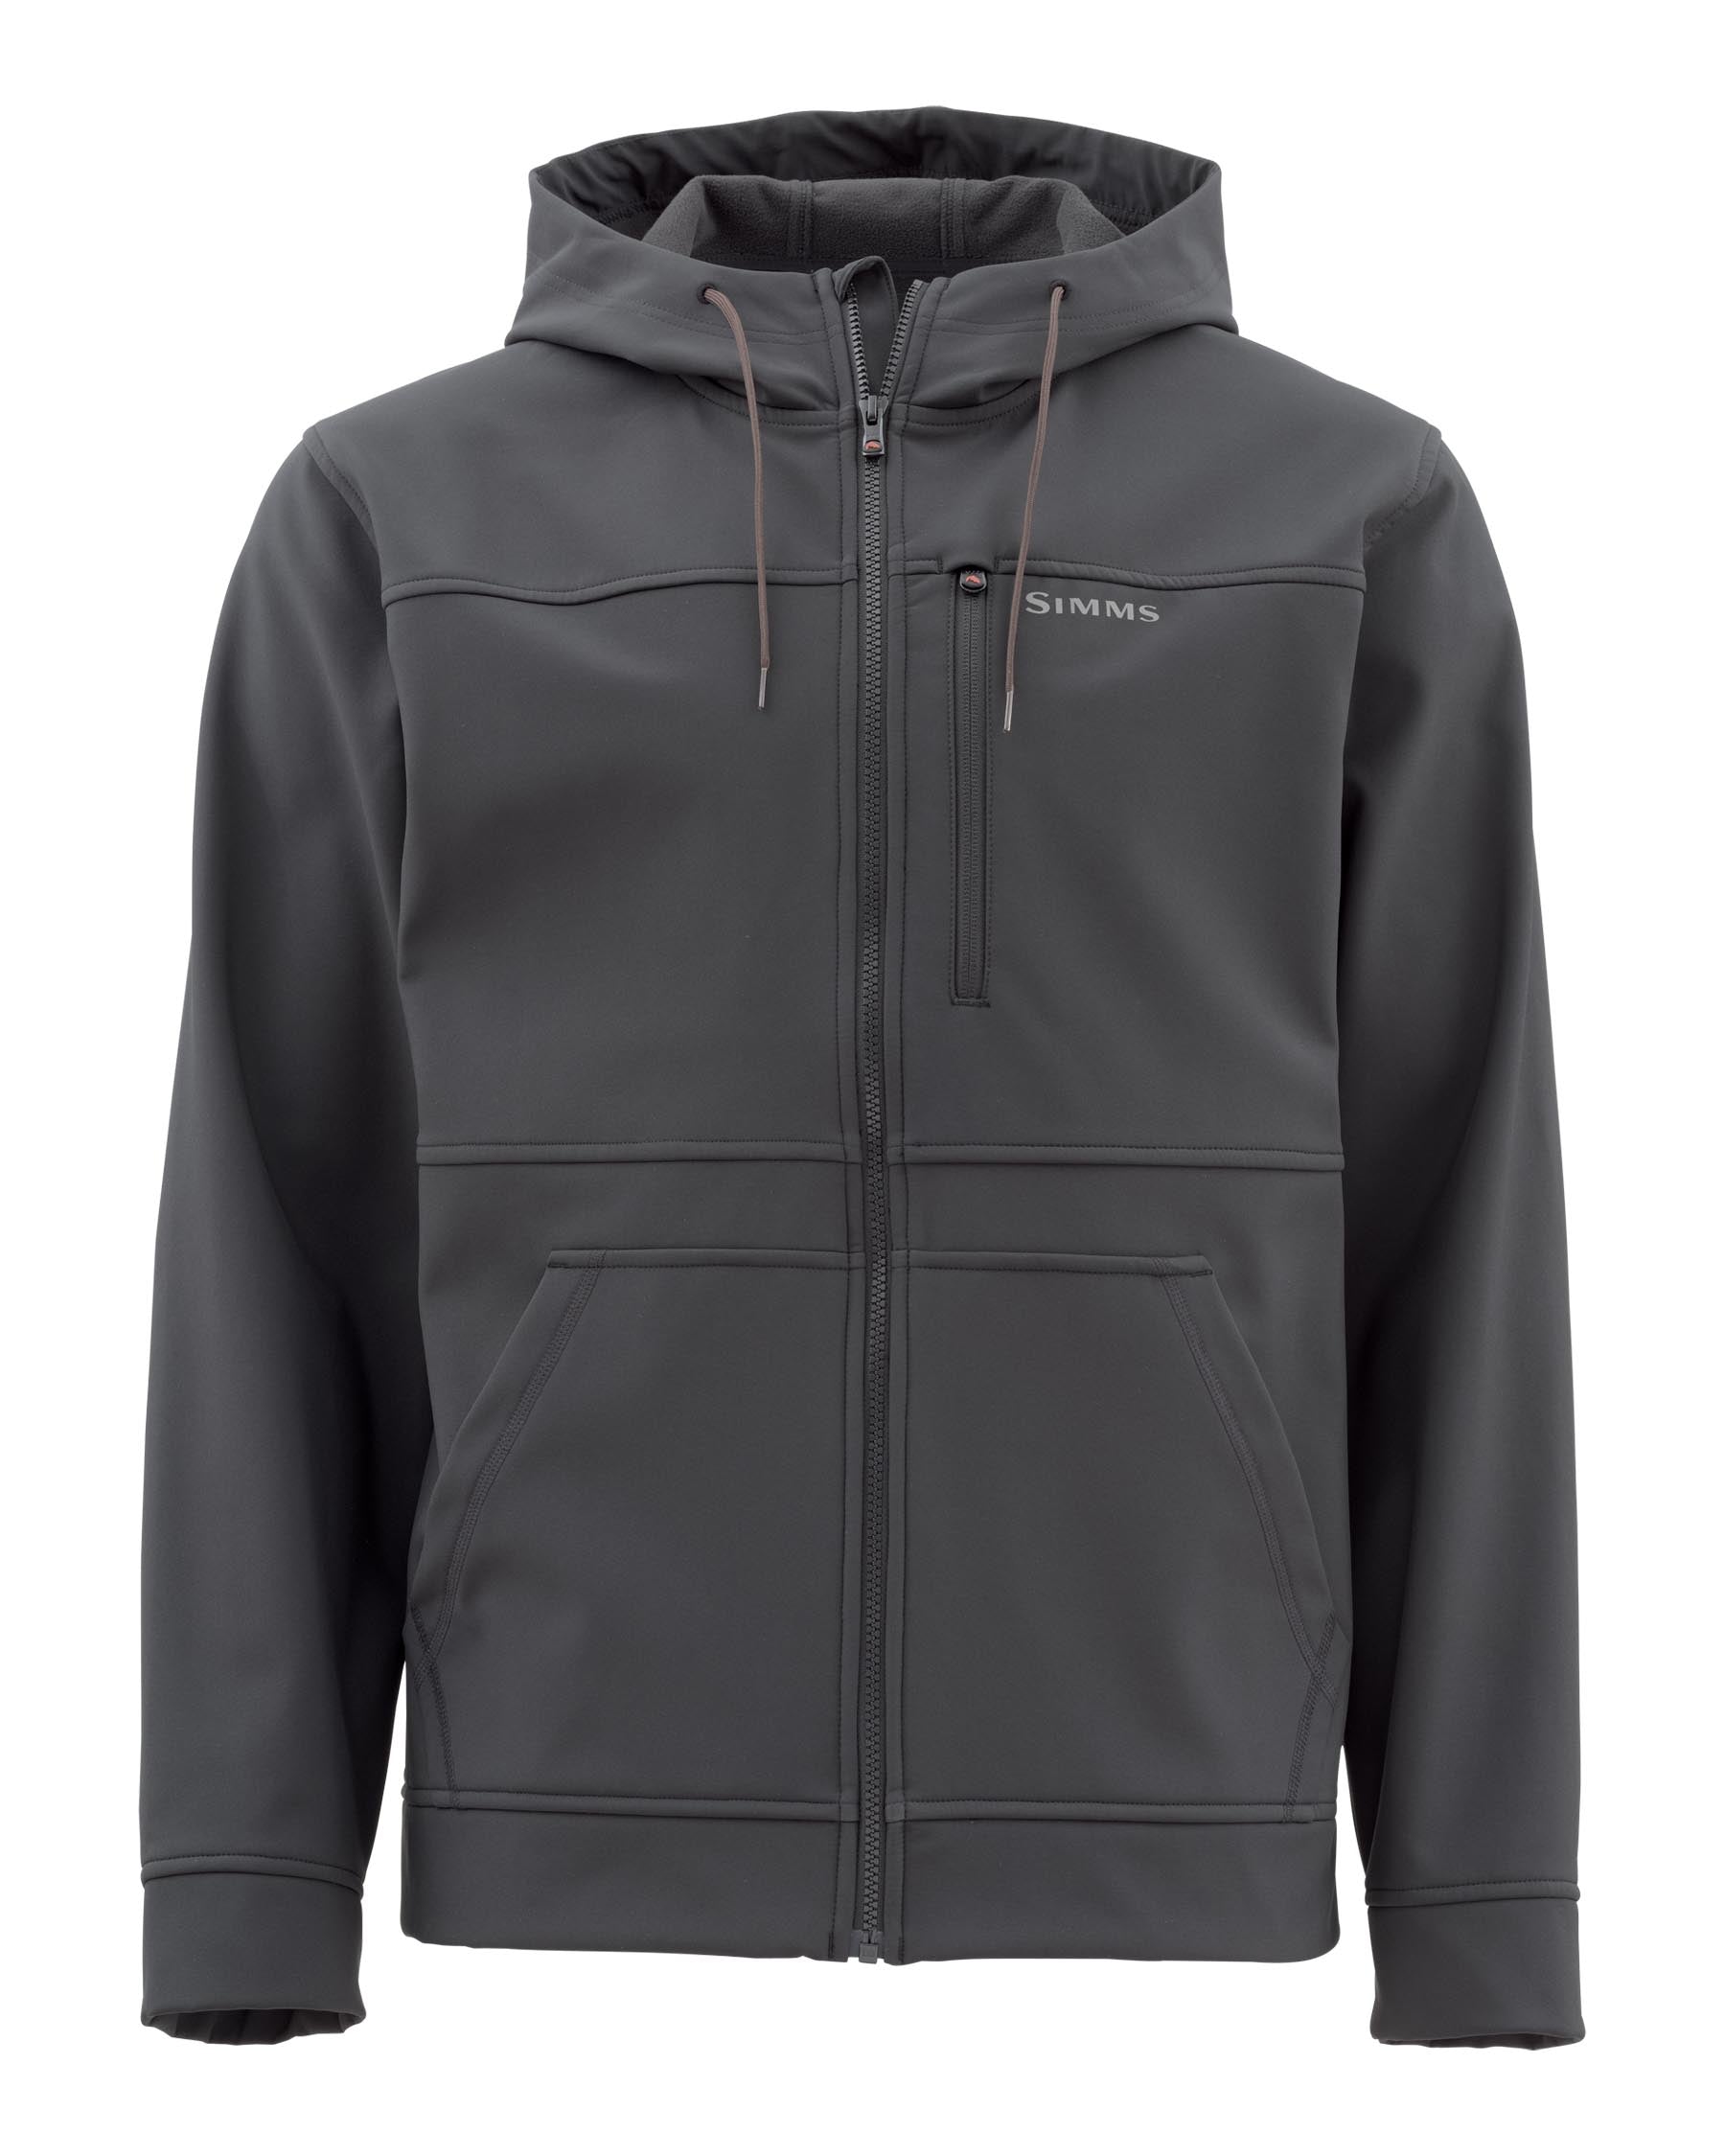 Simms Rogue Fleece Hoody - Raven - S - Mansfield Hunting & Fishing - Products to prepare for Corona Virus